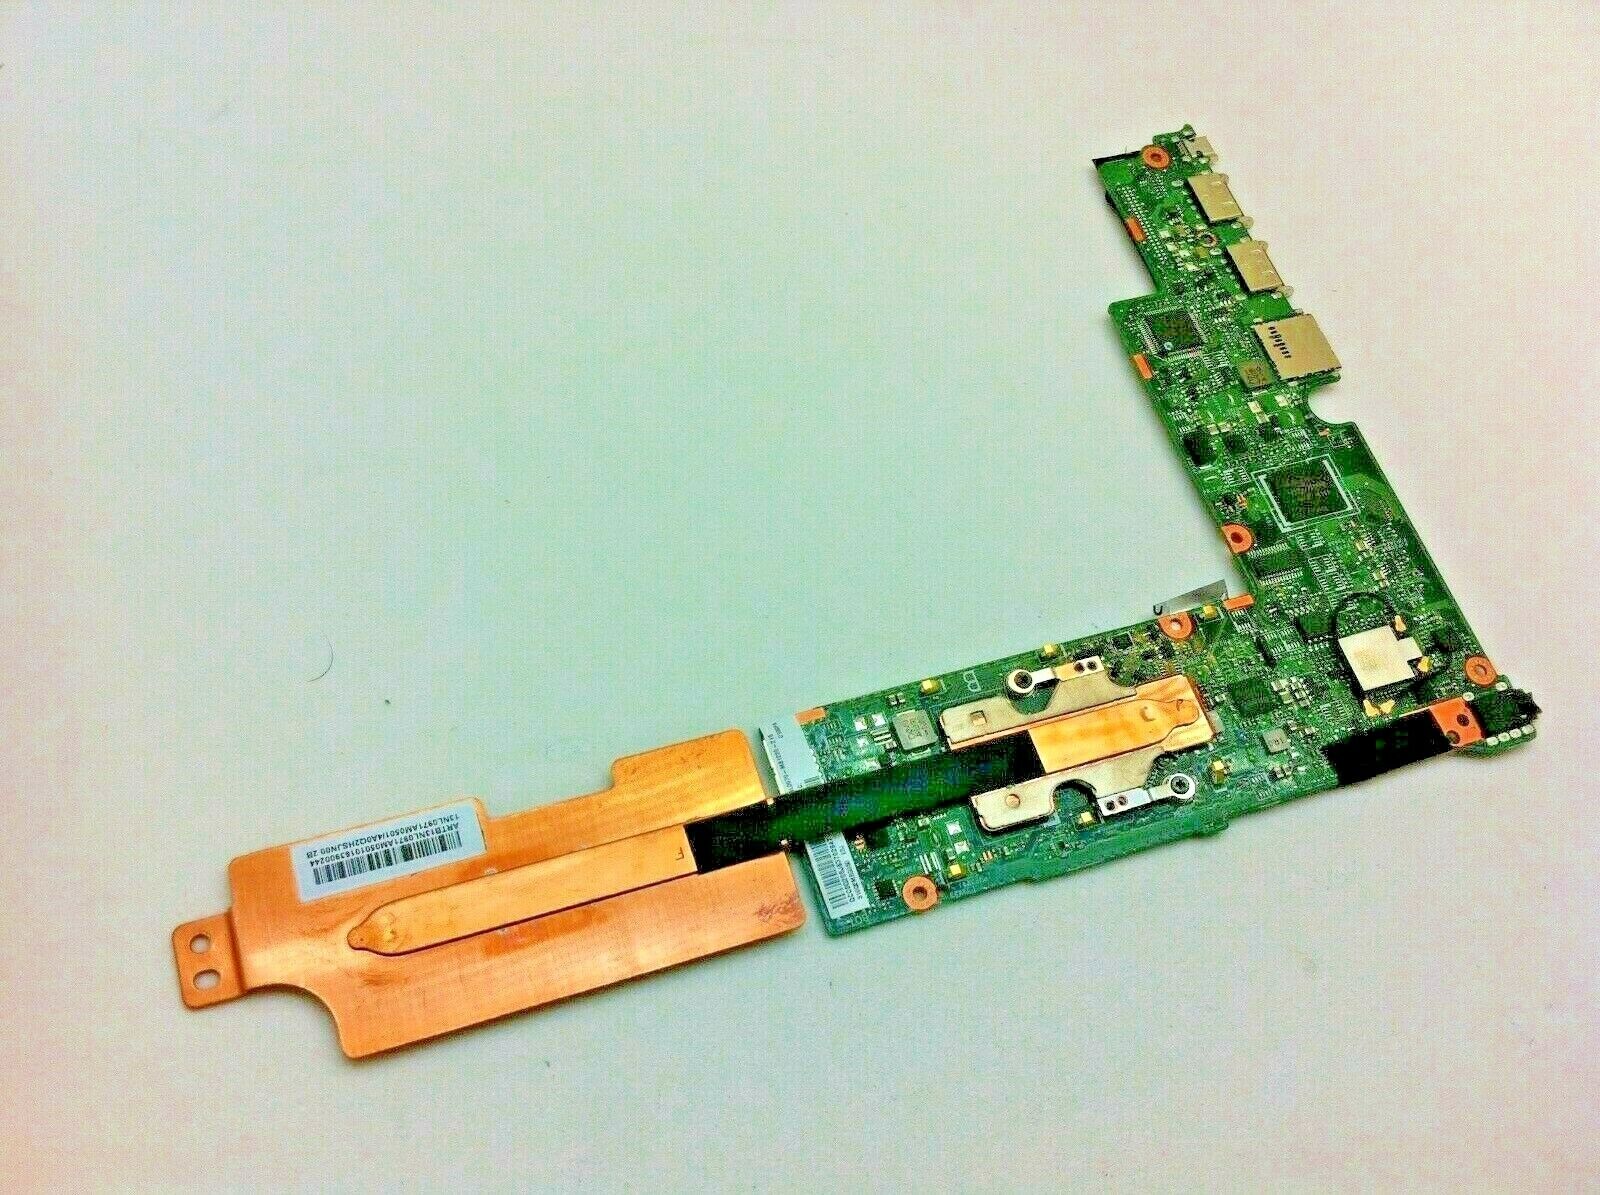 ASUS Chromebook C100P C100PA C100PA-DS03 Motherboard - 60NL0970-MB1220-215 / 194